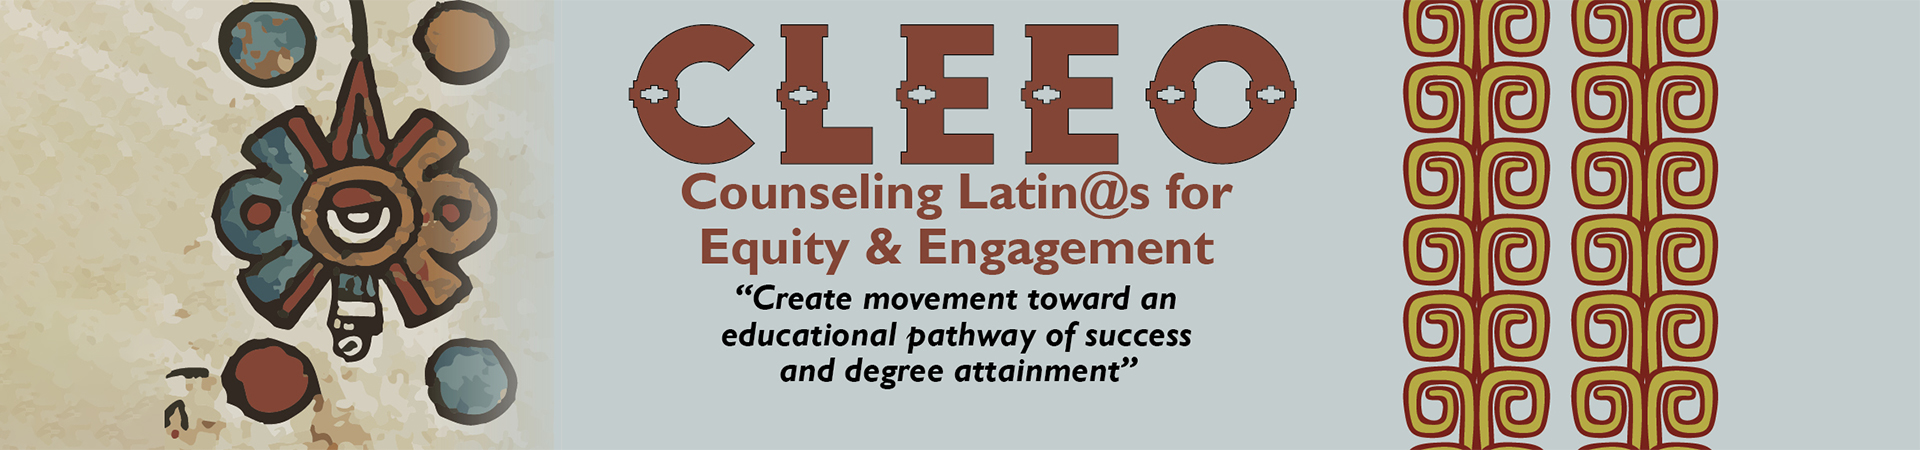 Counseling Latin@s for Equity & Engagement (CLEEO): Create movement toward an educational pathway of success and degree attainment.